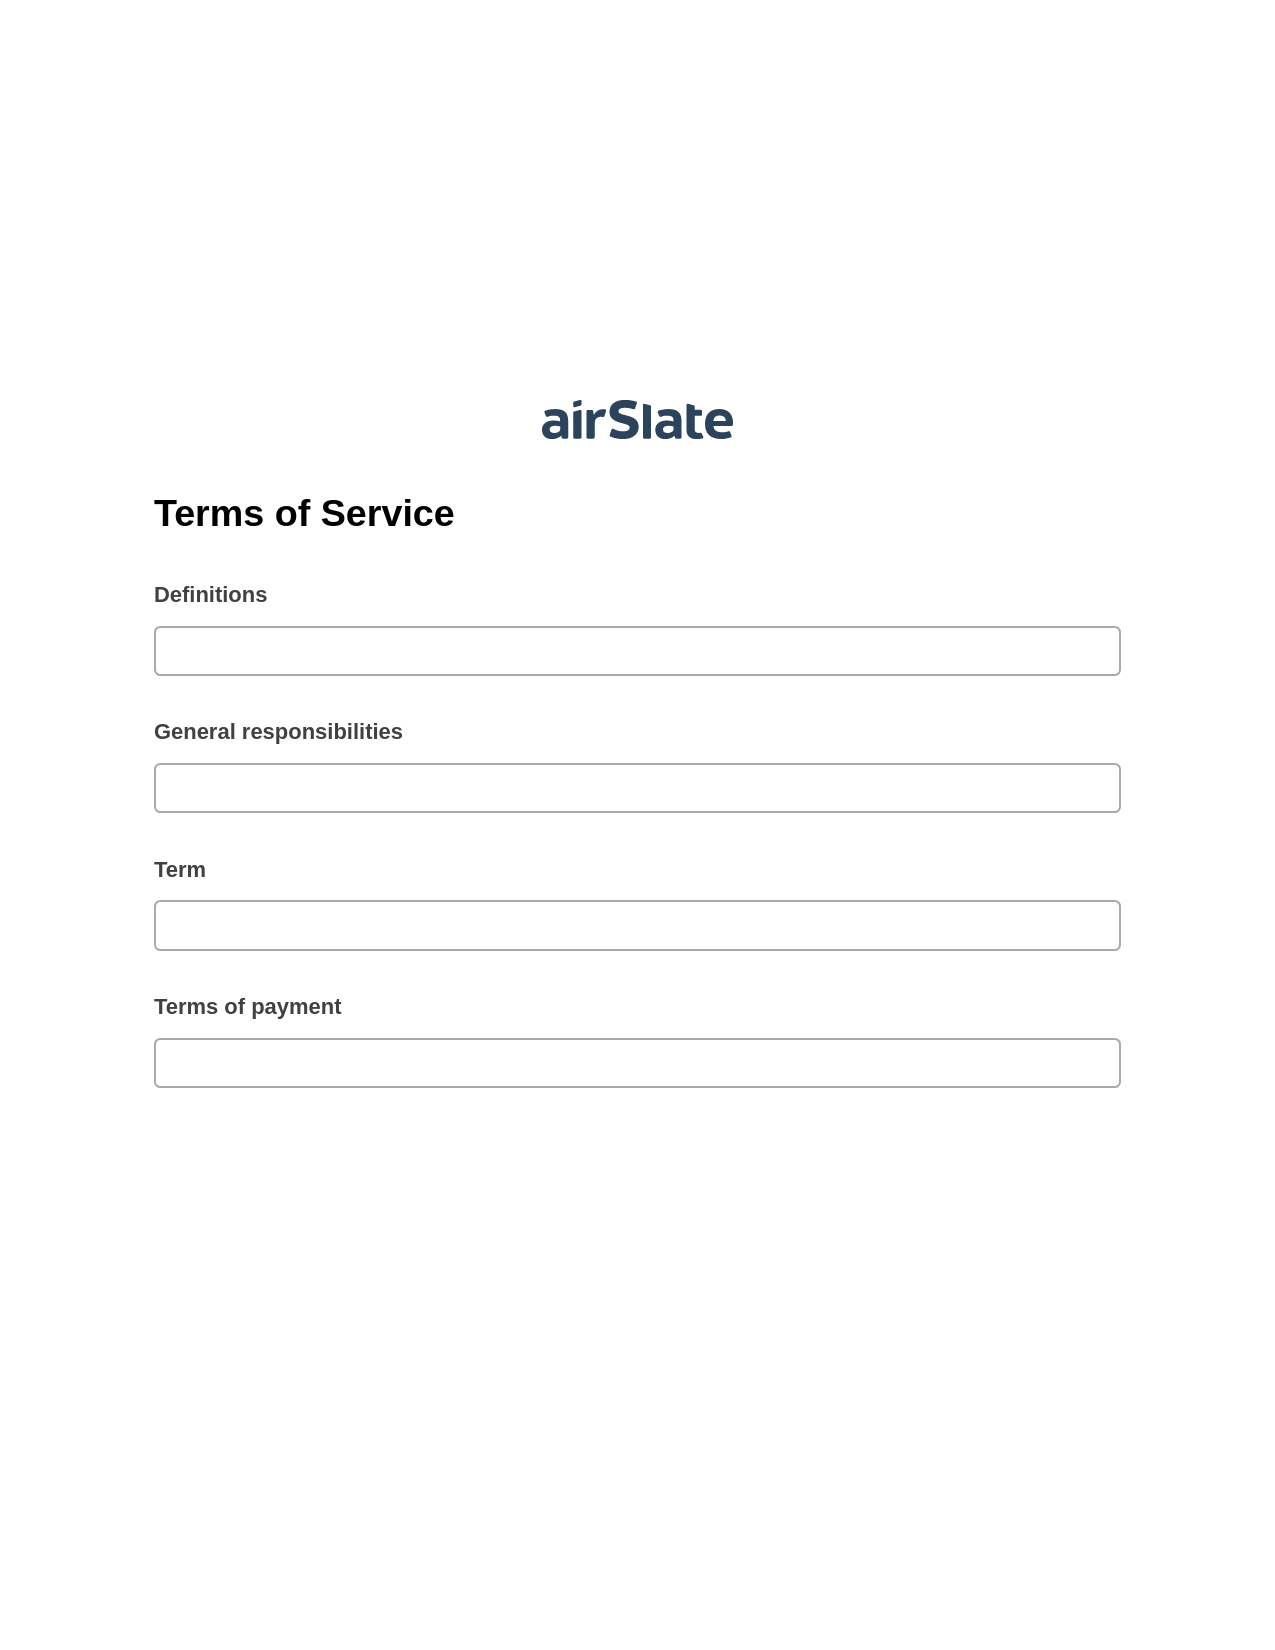 Terms of Service Pre-fill Document Bot, Send a Slate with Roles Bot, OneDrive Bot